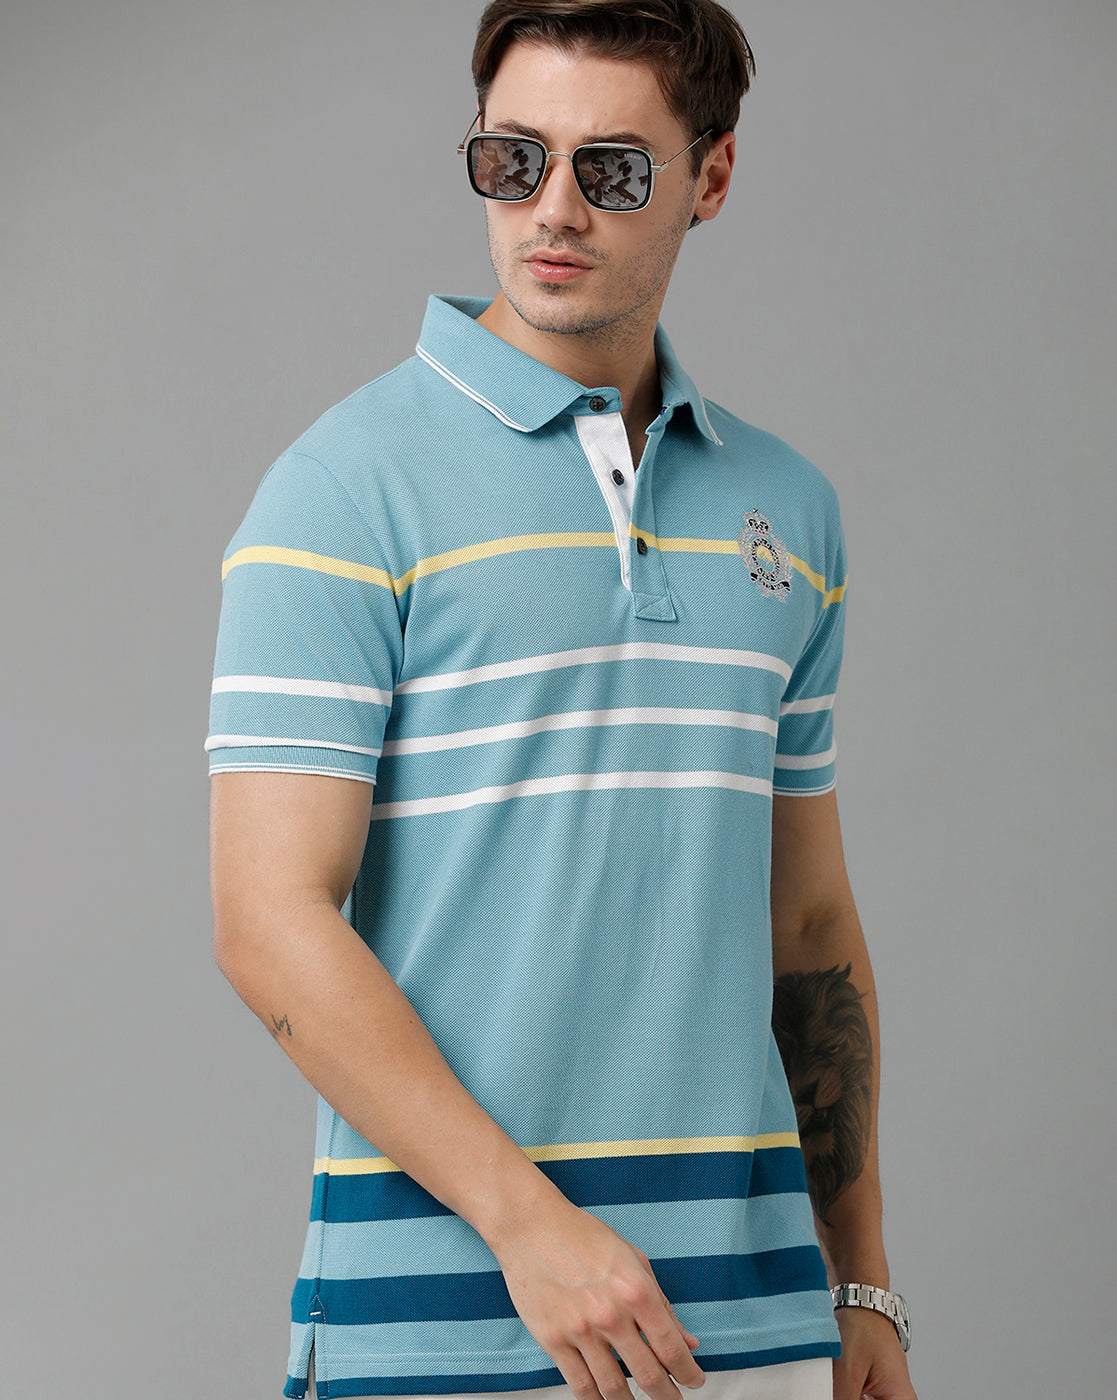 India's finest Brand for mens wear